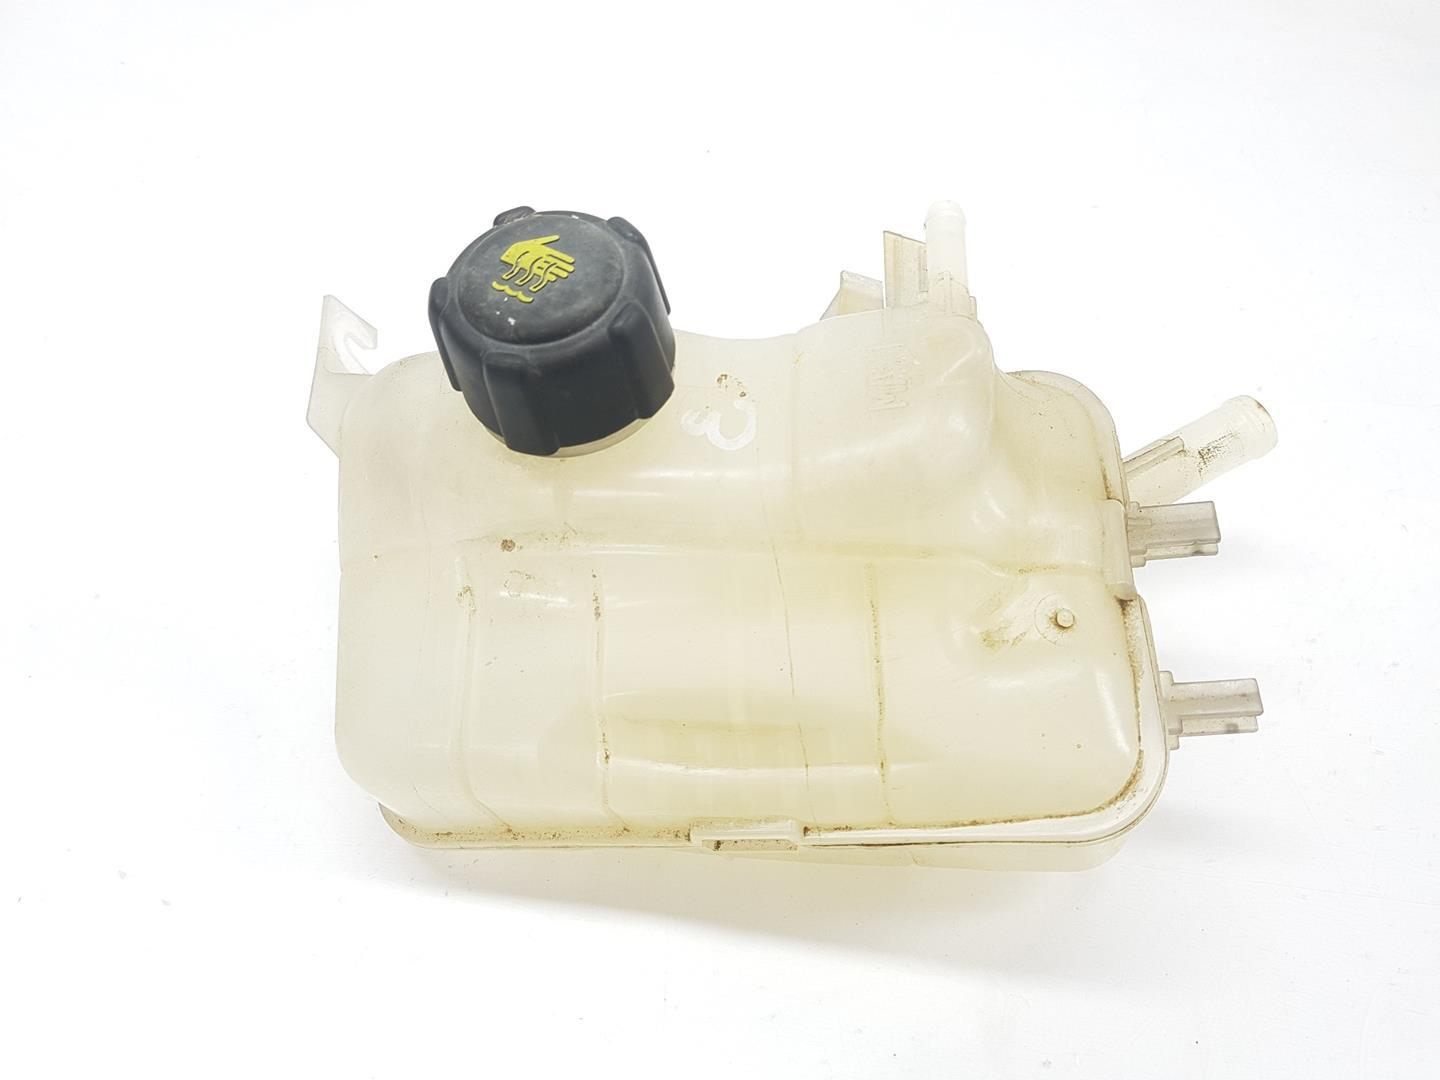 RENAULT Scenic 3 generation (2009-2015) Expansion Tank 217100005R, 217100005R 21421449